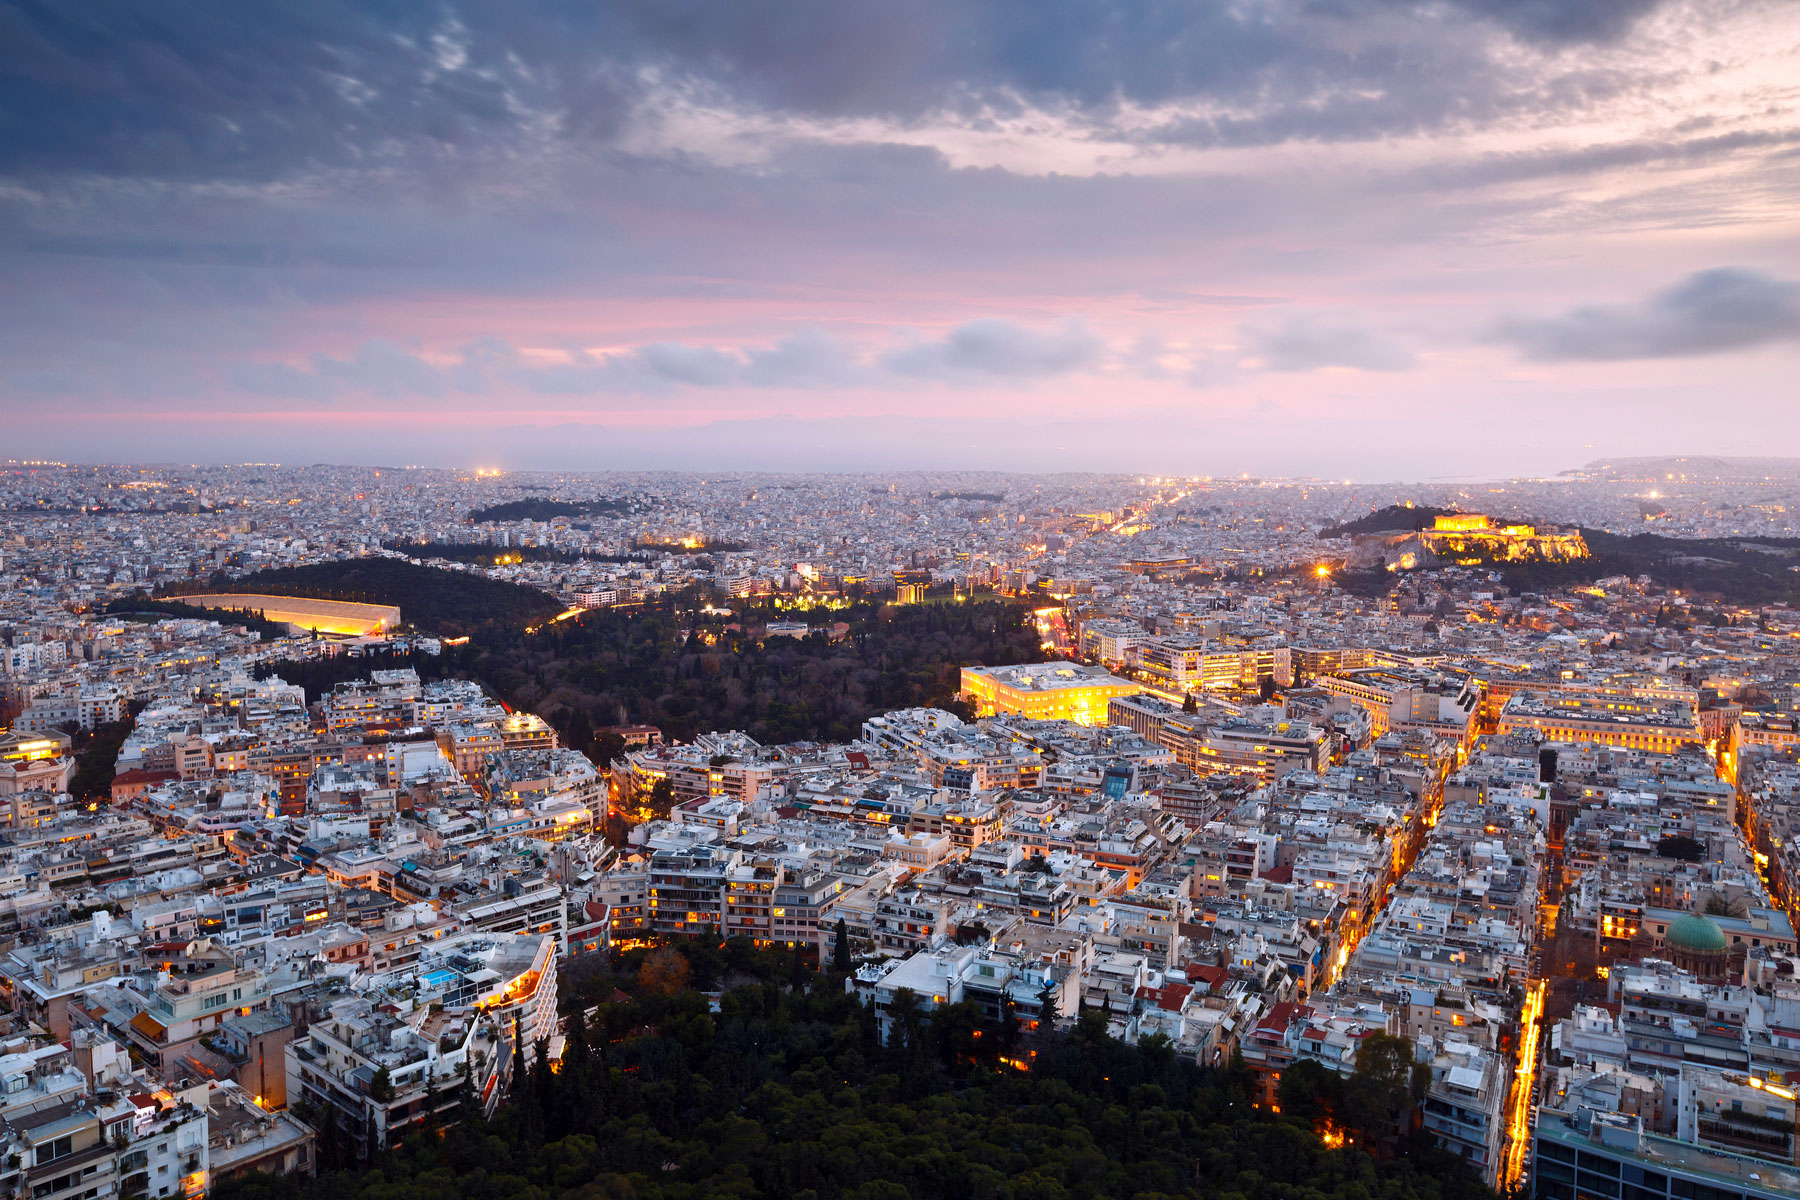 Athens at dusk from Lycabettus Hill